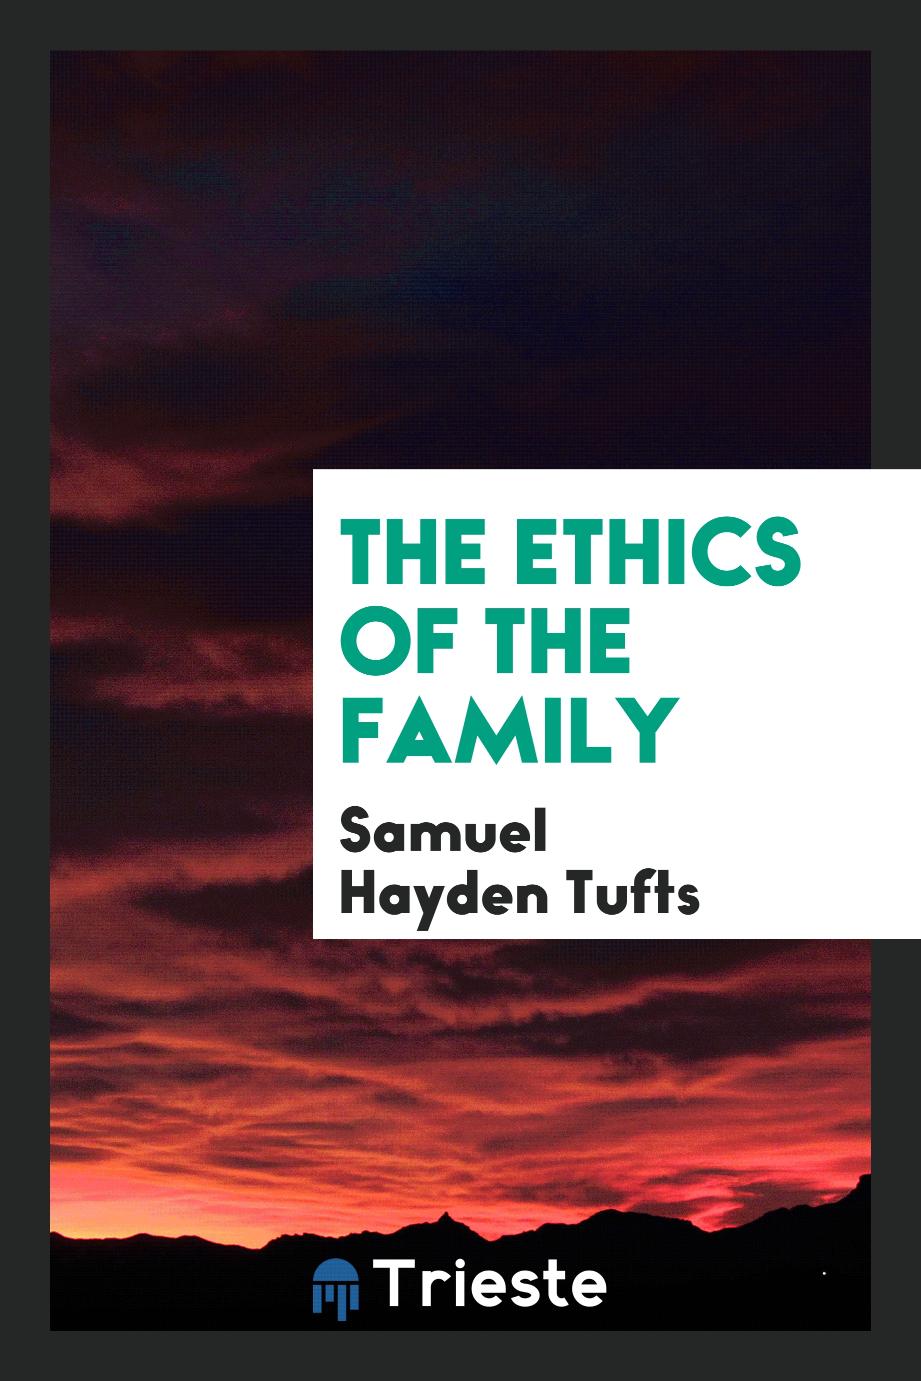 The ethics of the Family